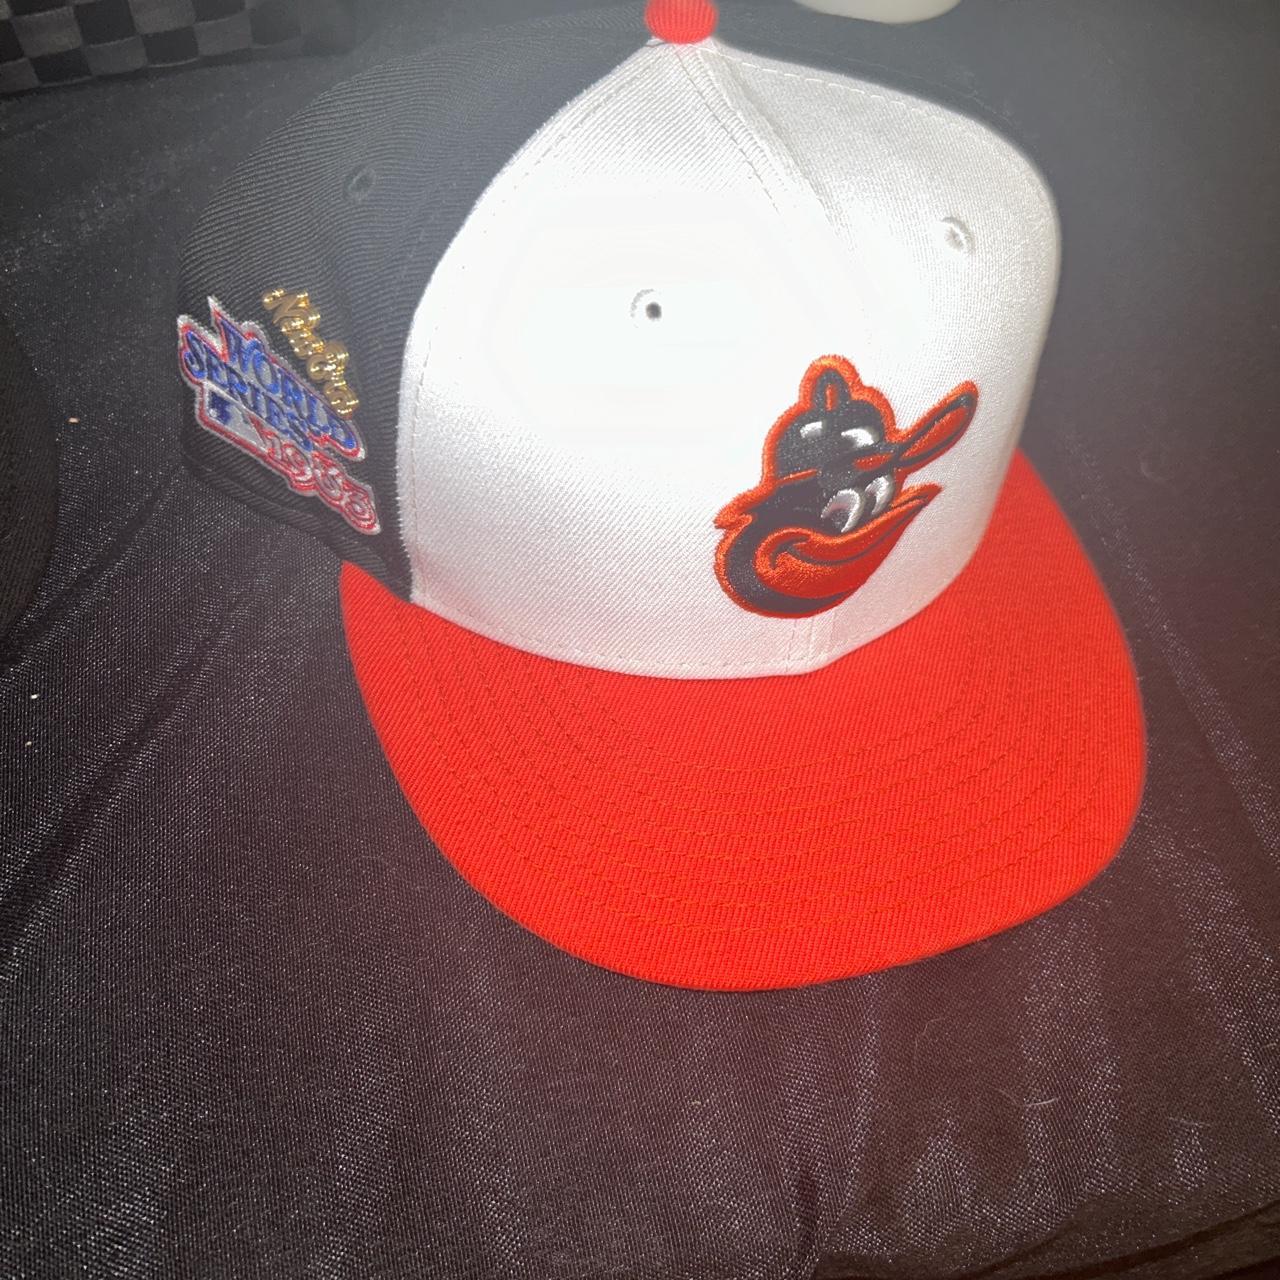 Baltimore Orioles Cooperstown Collection, Orioles Cooperstown